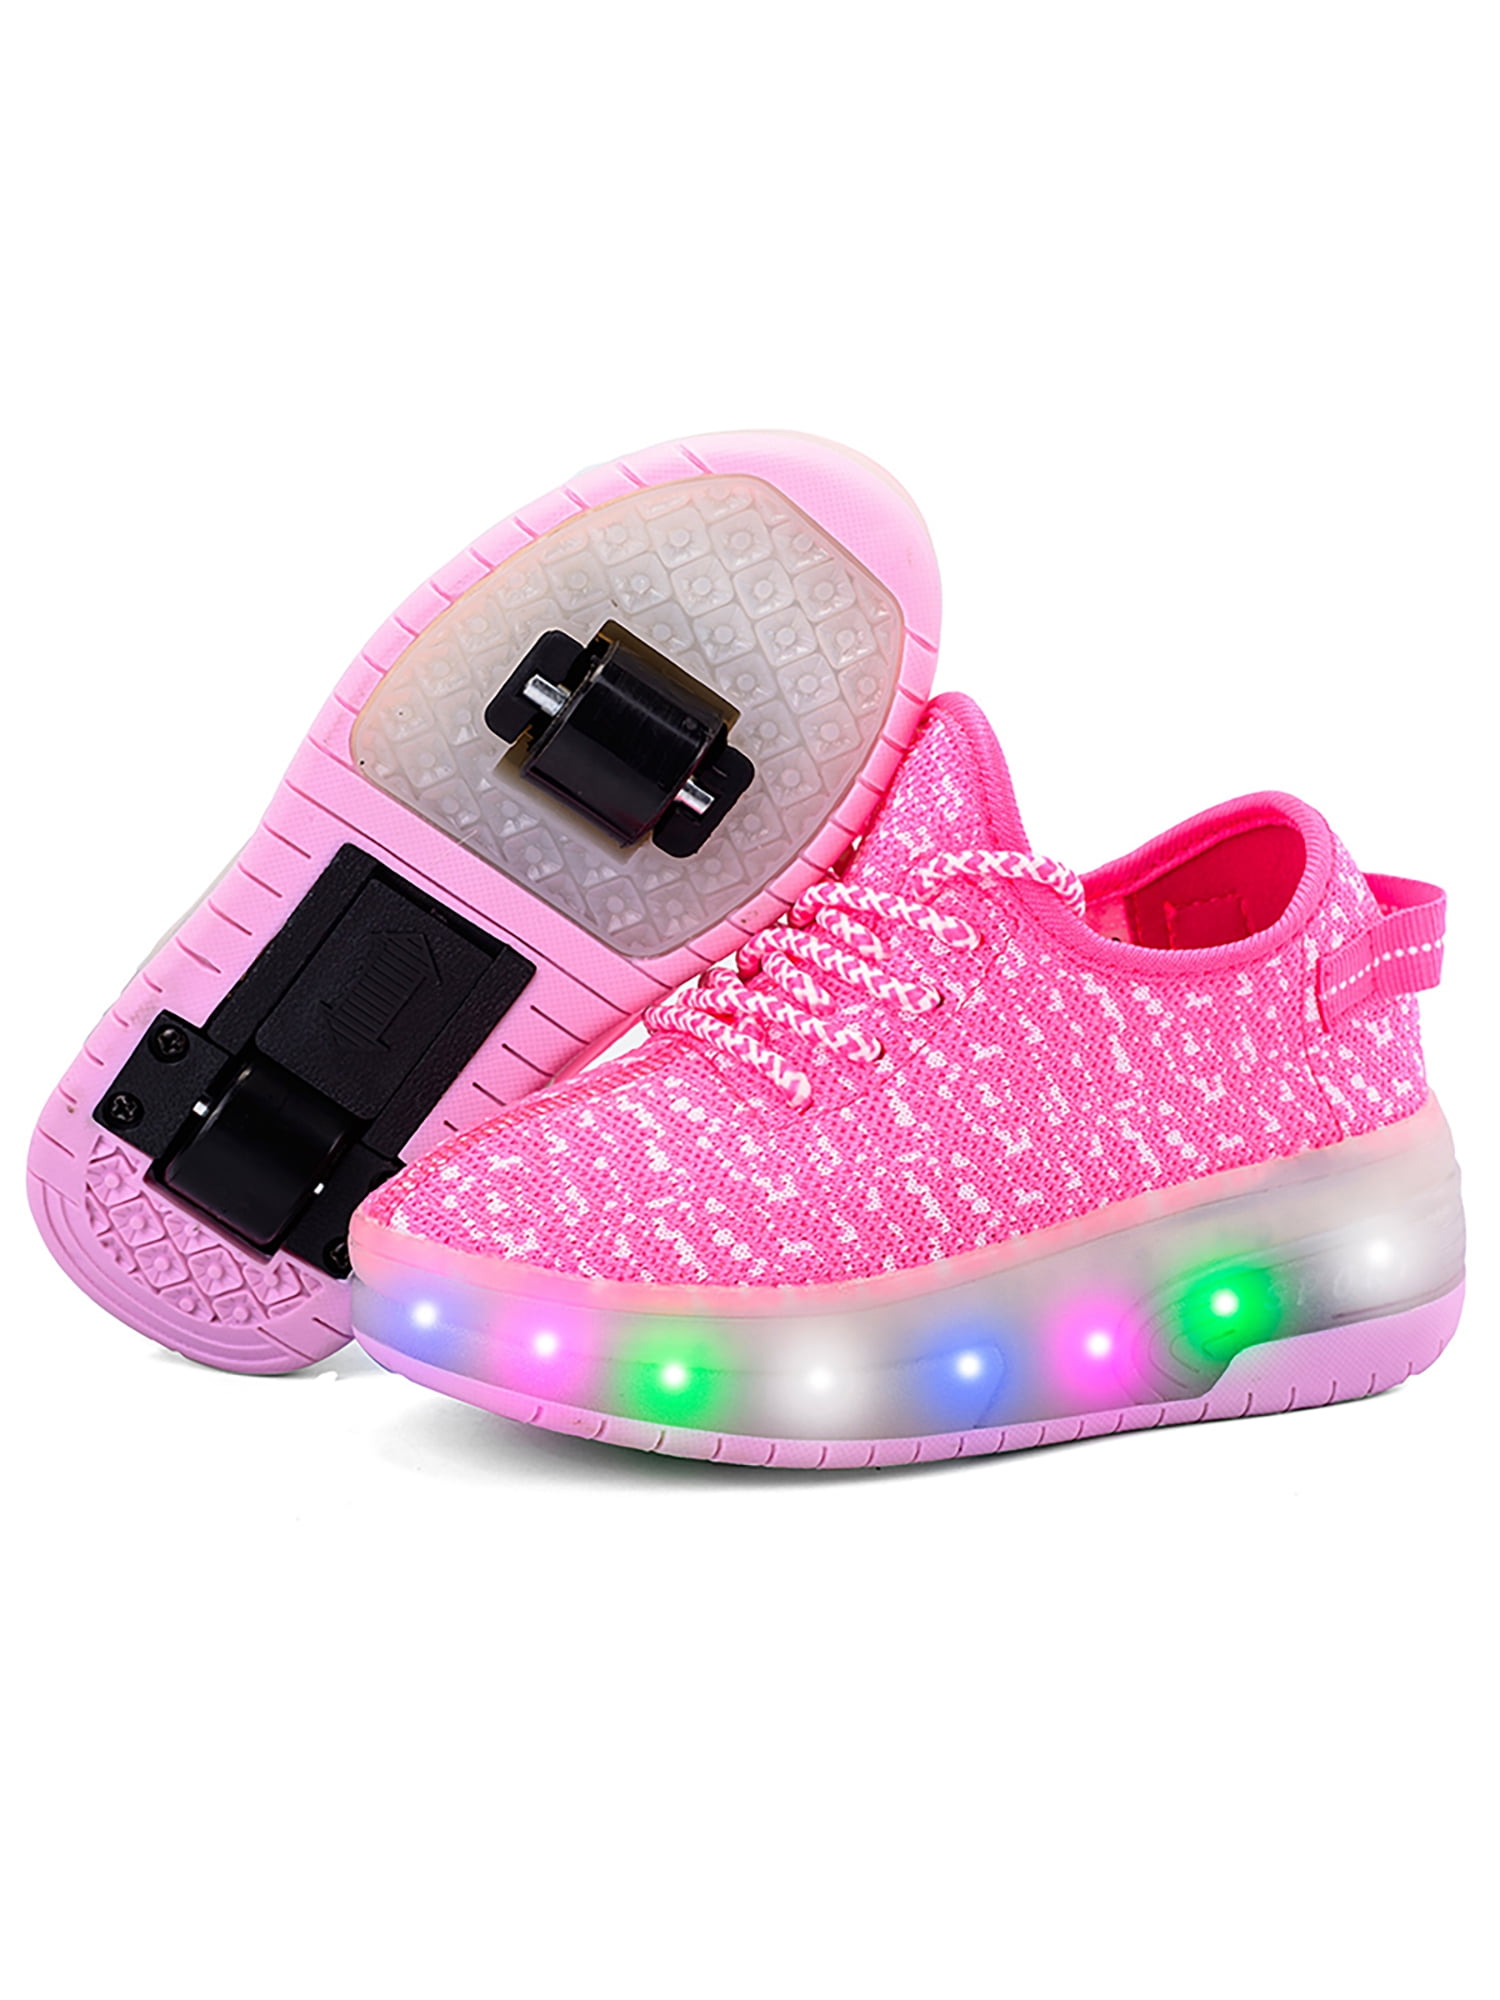 Sneakers Roller Skate Shoes For Kids Boys Girls Wheels Sneakers With On  Double Wheels Children Boy Girl Roller Sneakers Tennis Shoes 230413 From  Nan08, $96.62